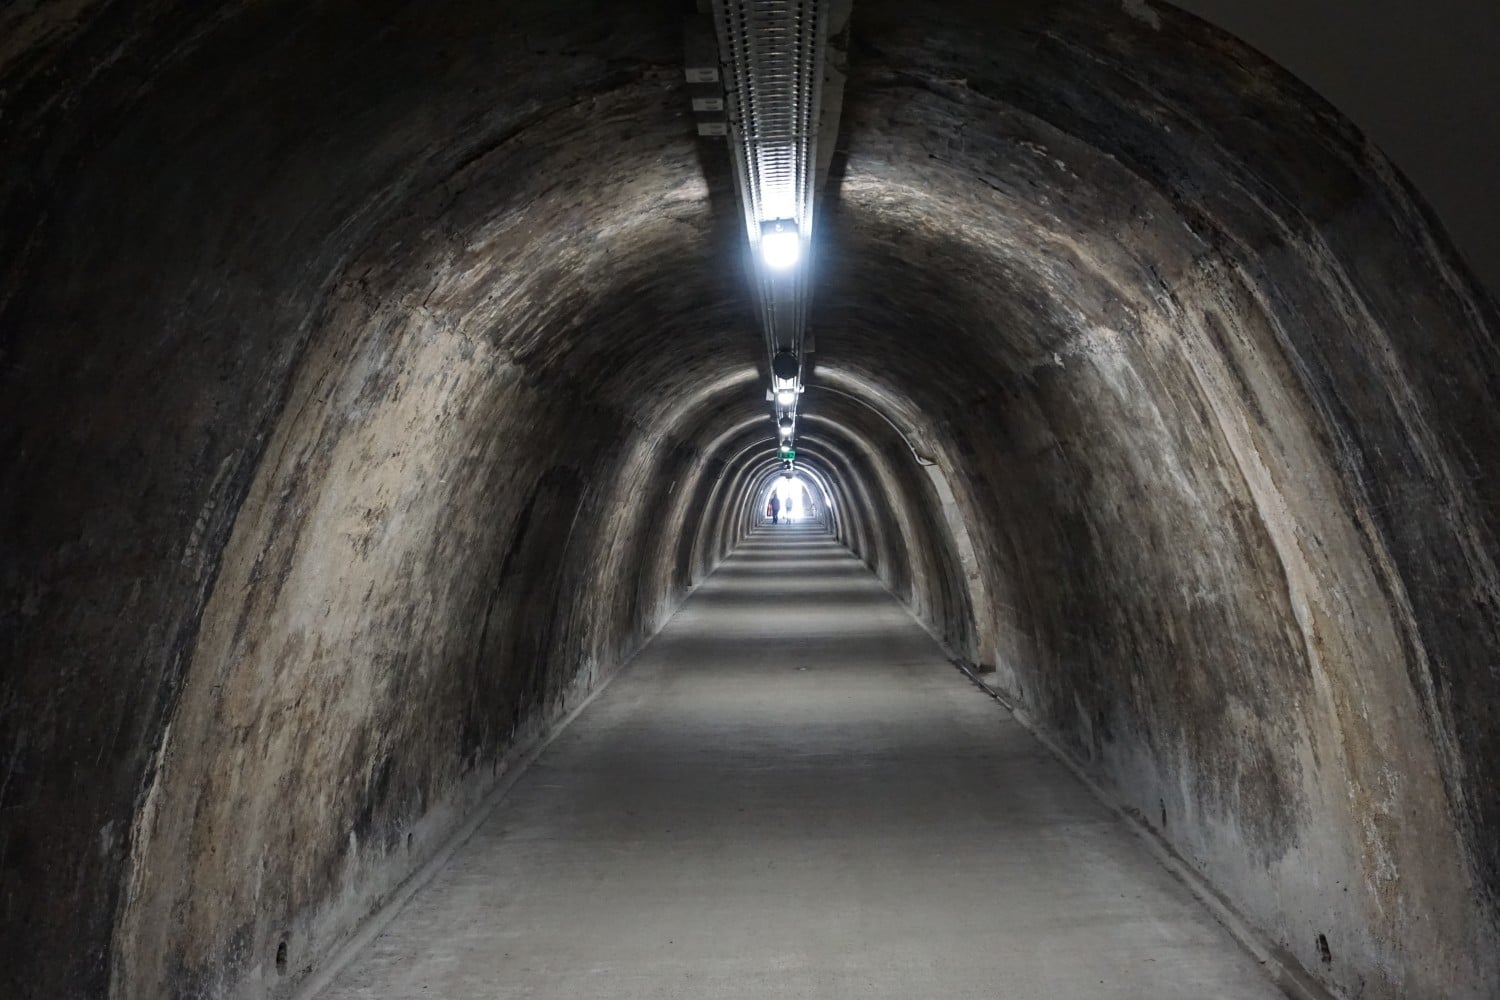 Awesome Reasons to Go to Zagreb - Gric Tunnels. Read more.